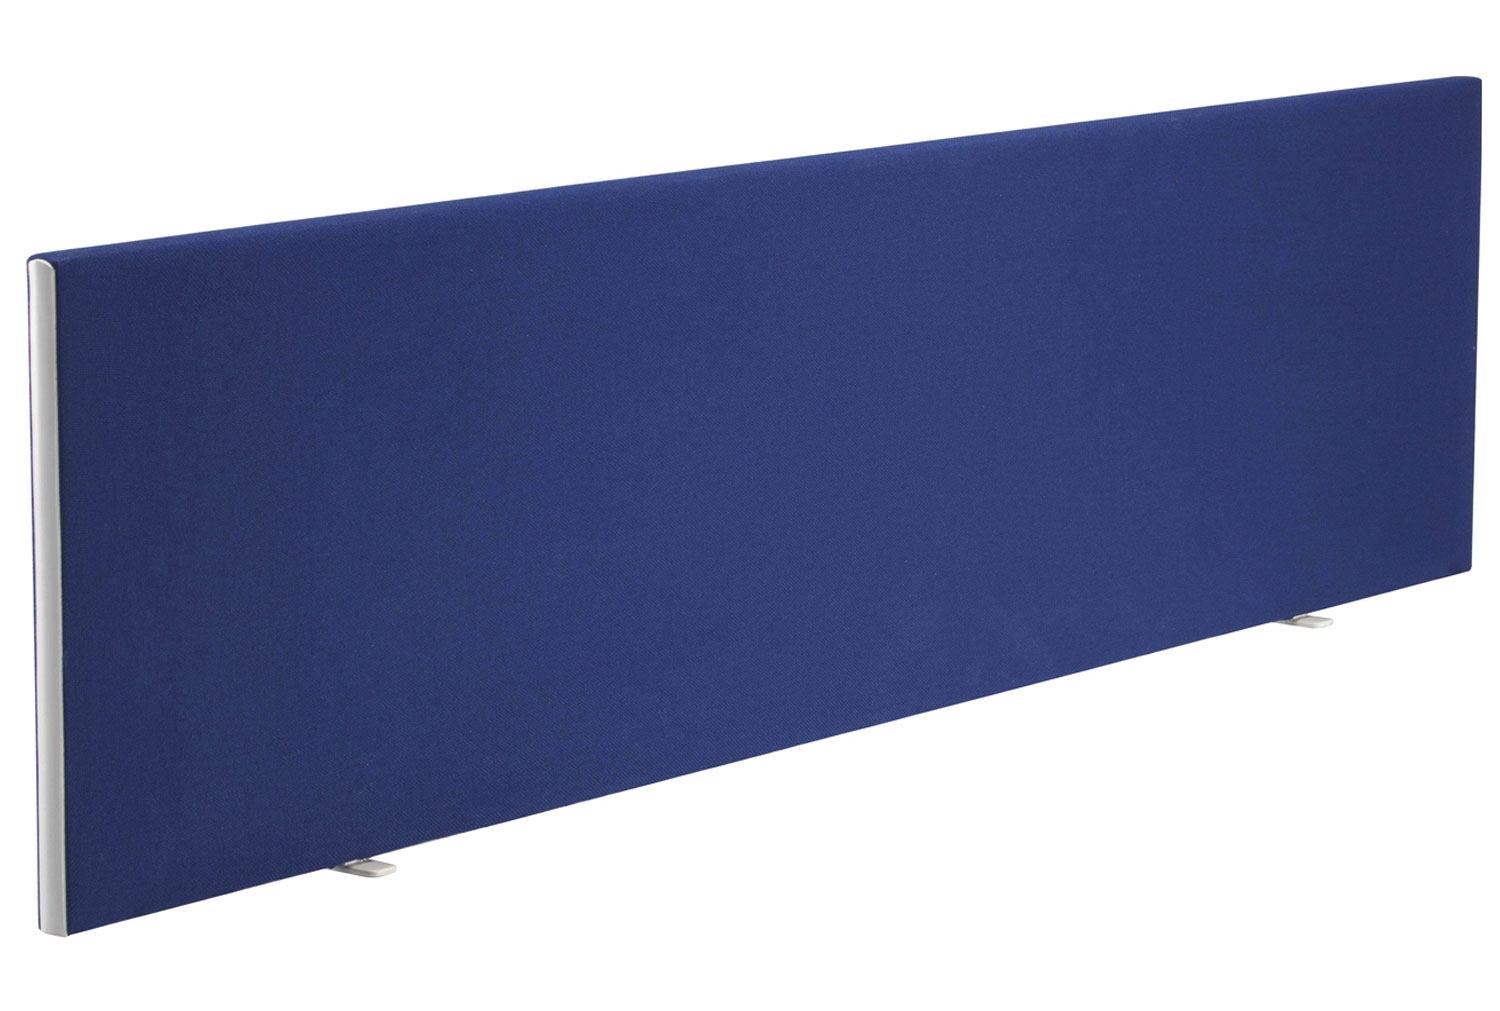 Whist Economy Rectangular Desktop Office Screens, 180wx40h (cm), Royal Blue, Express Delivery